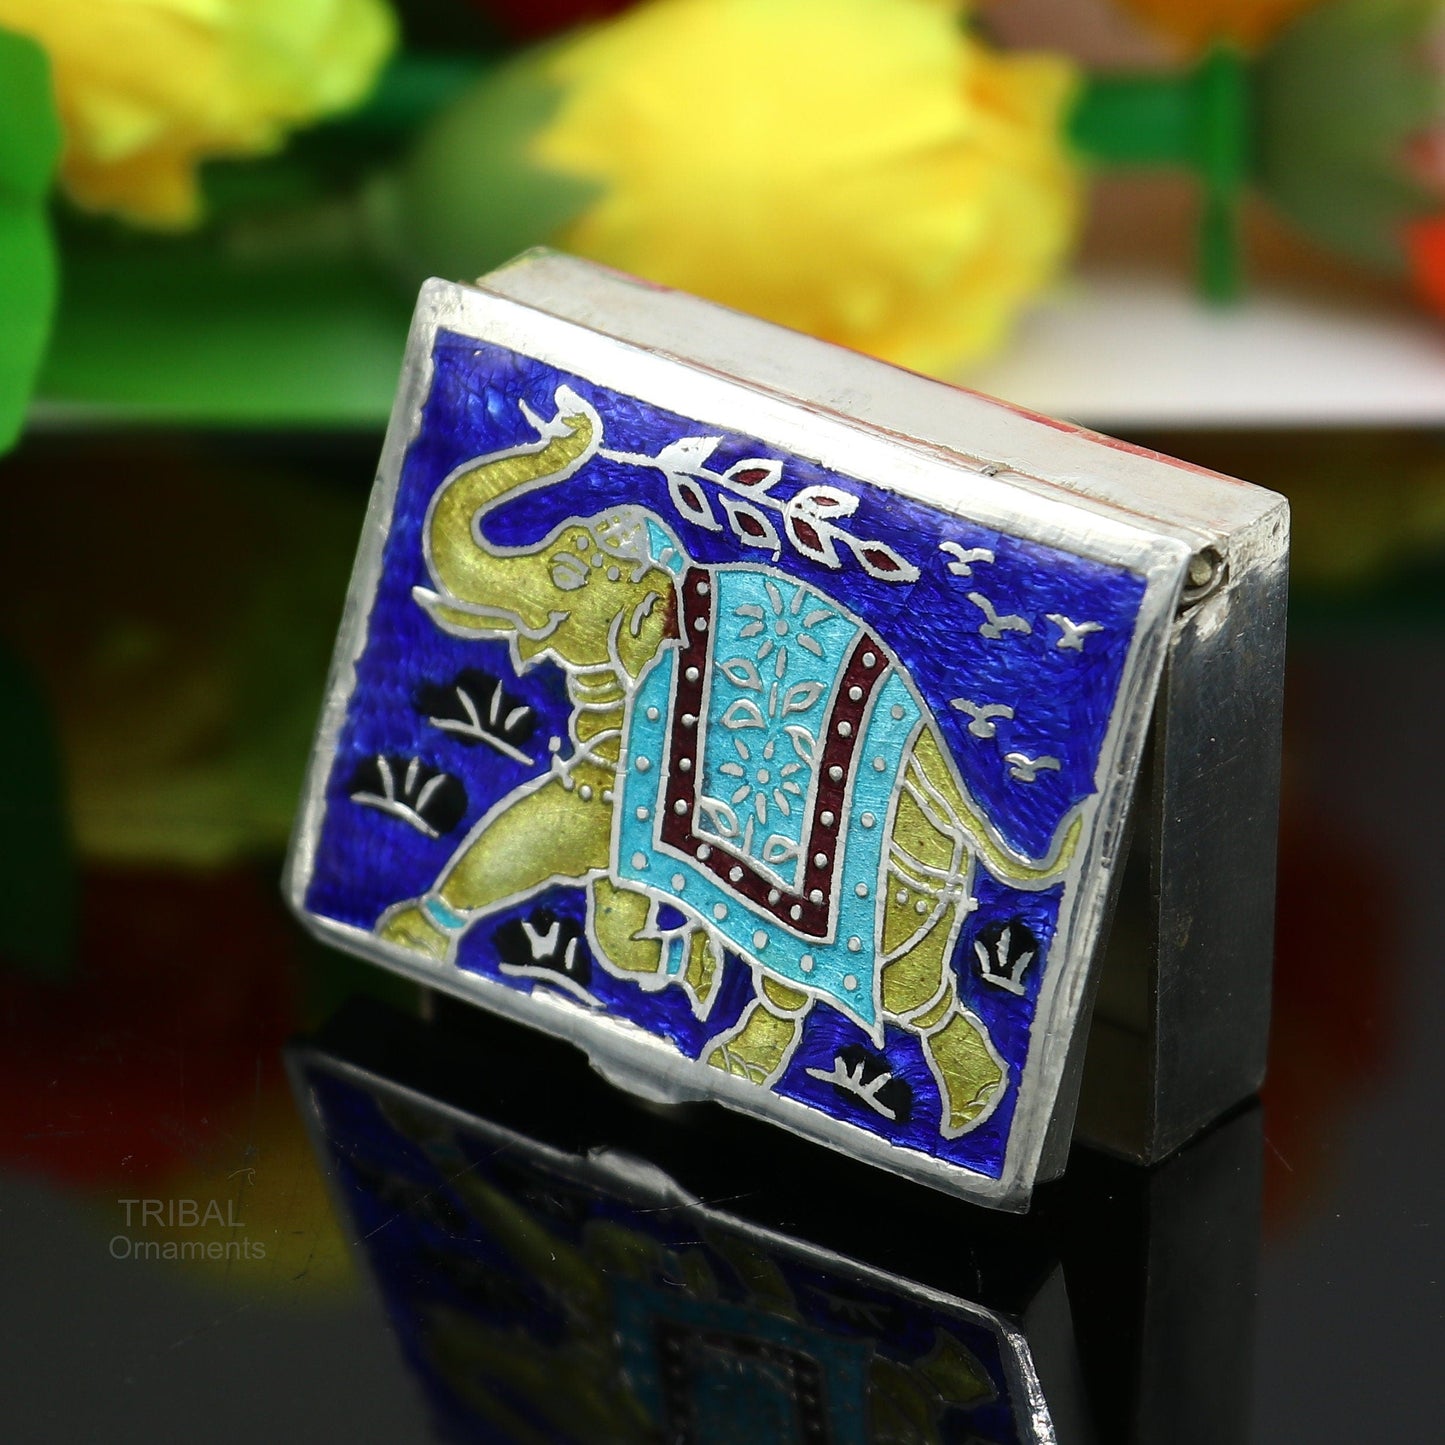 925 Sterling silver handmade trinket box, solid container box, casket box, sindoor box, enamel elephant work customized gifting box stb333 - TRIBAL ORNAMENTS